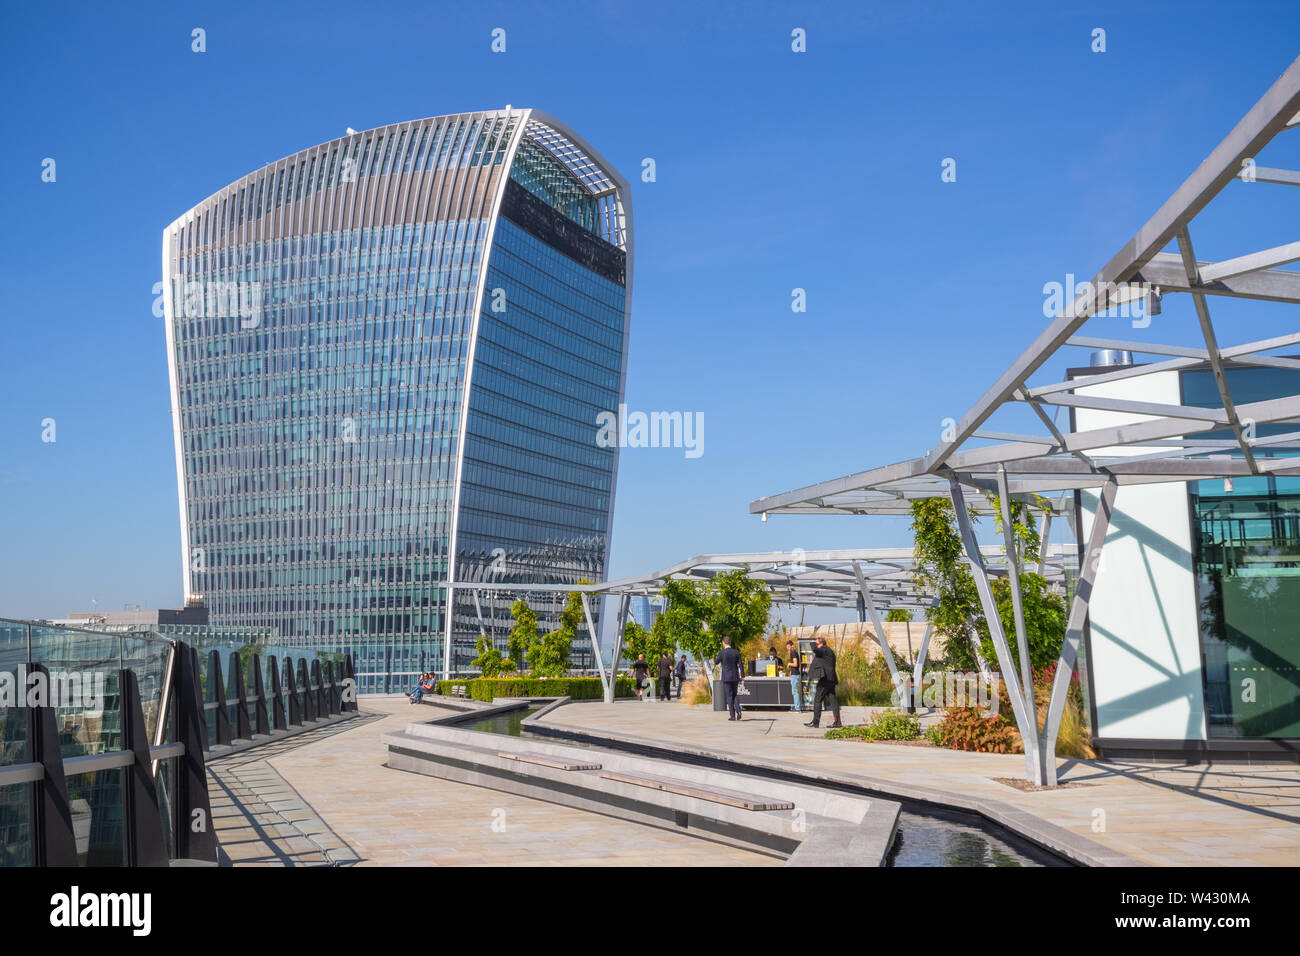 London, UK - July 16, 2019 - 20 Fenchurch Street building seen from The Garden at 120, a roof garden in the city of London Stock Photo